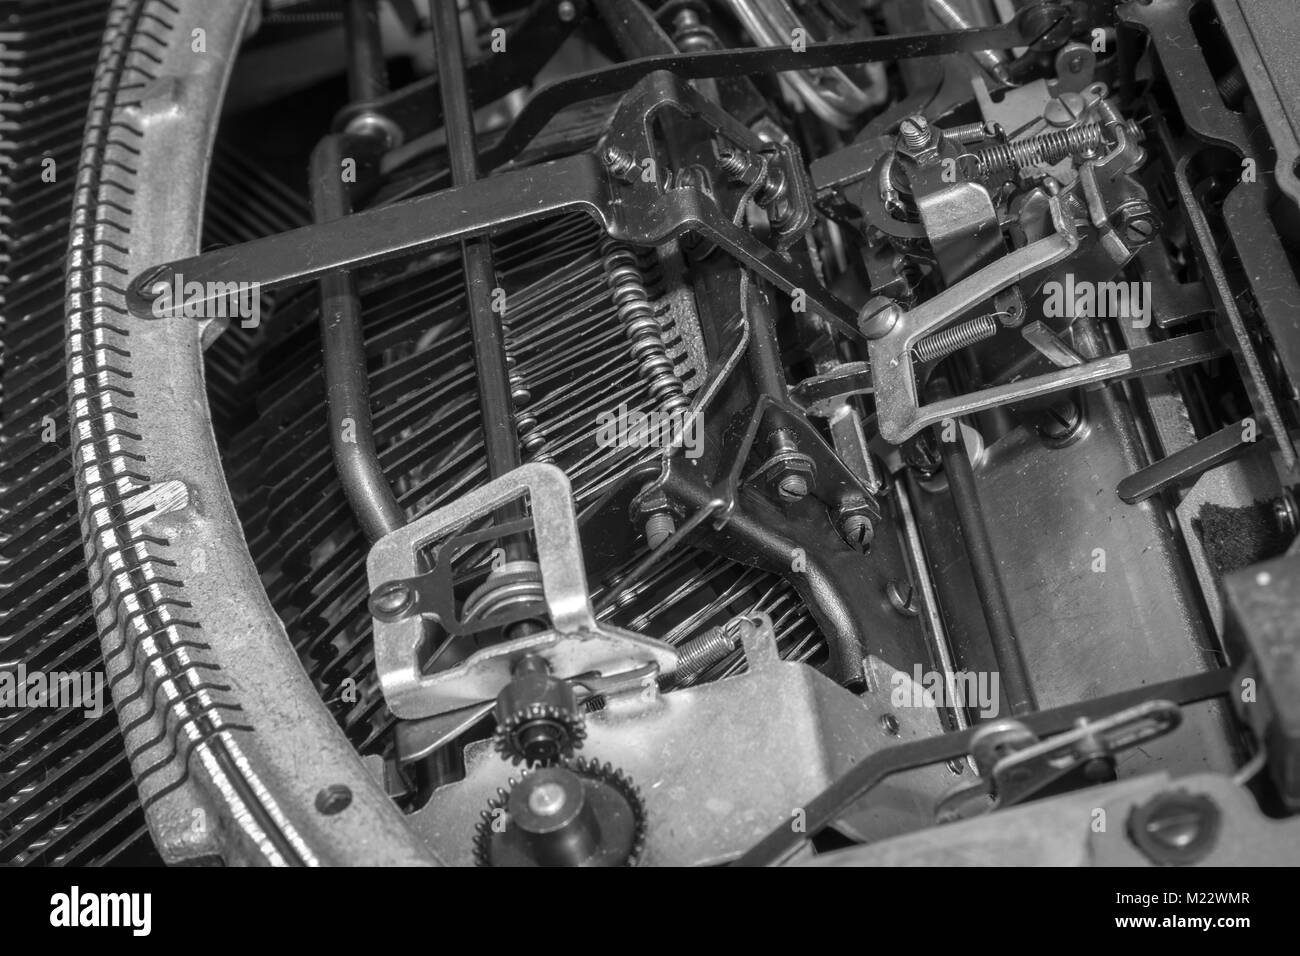 A view of an antique manual typewriter mechanism from underneath a portable typewriter built in the 1940s. Stock Photo